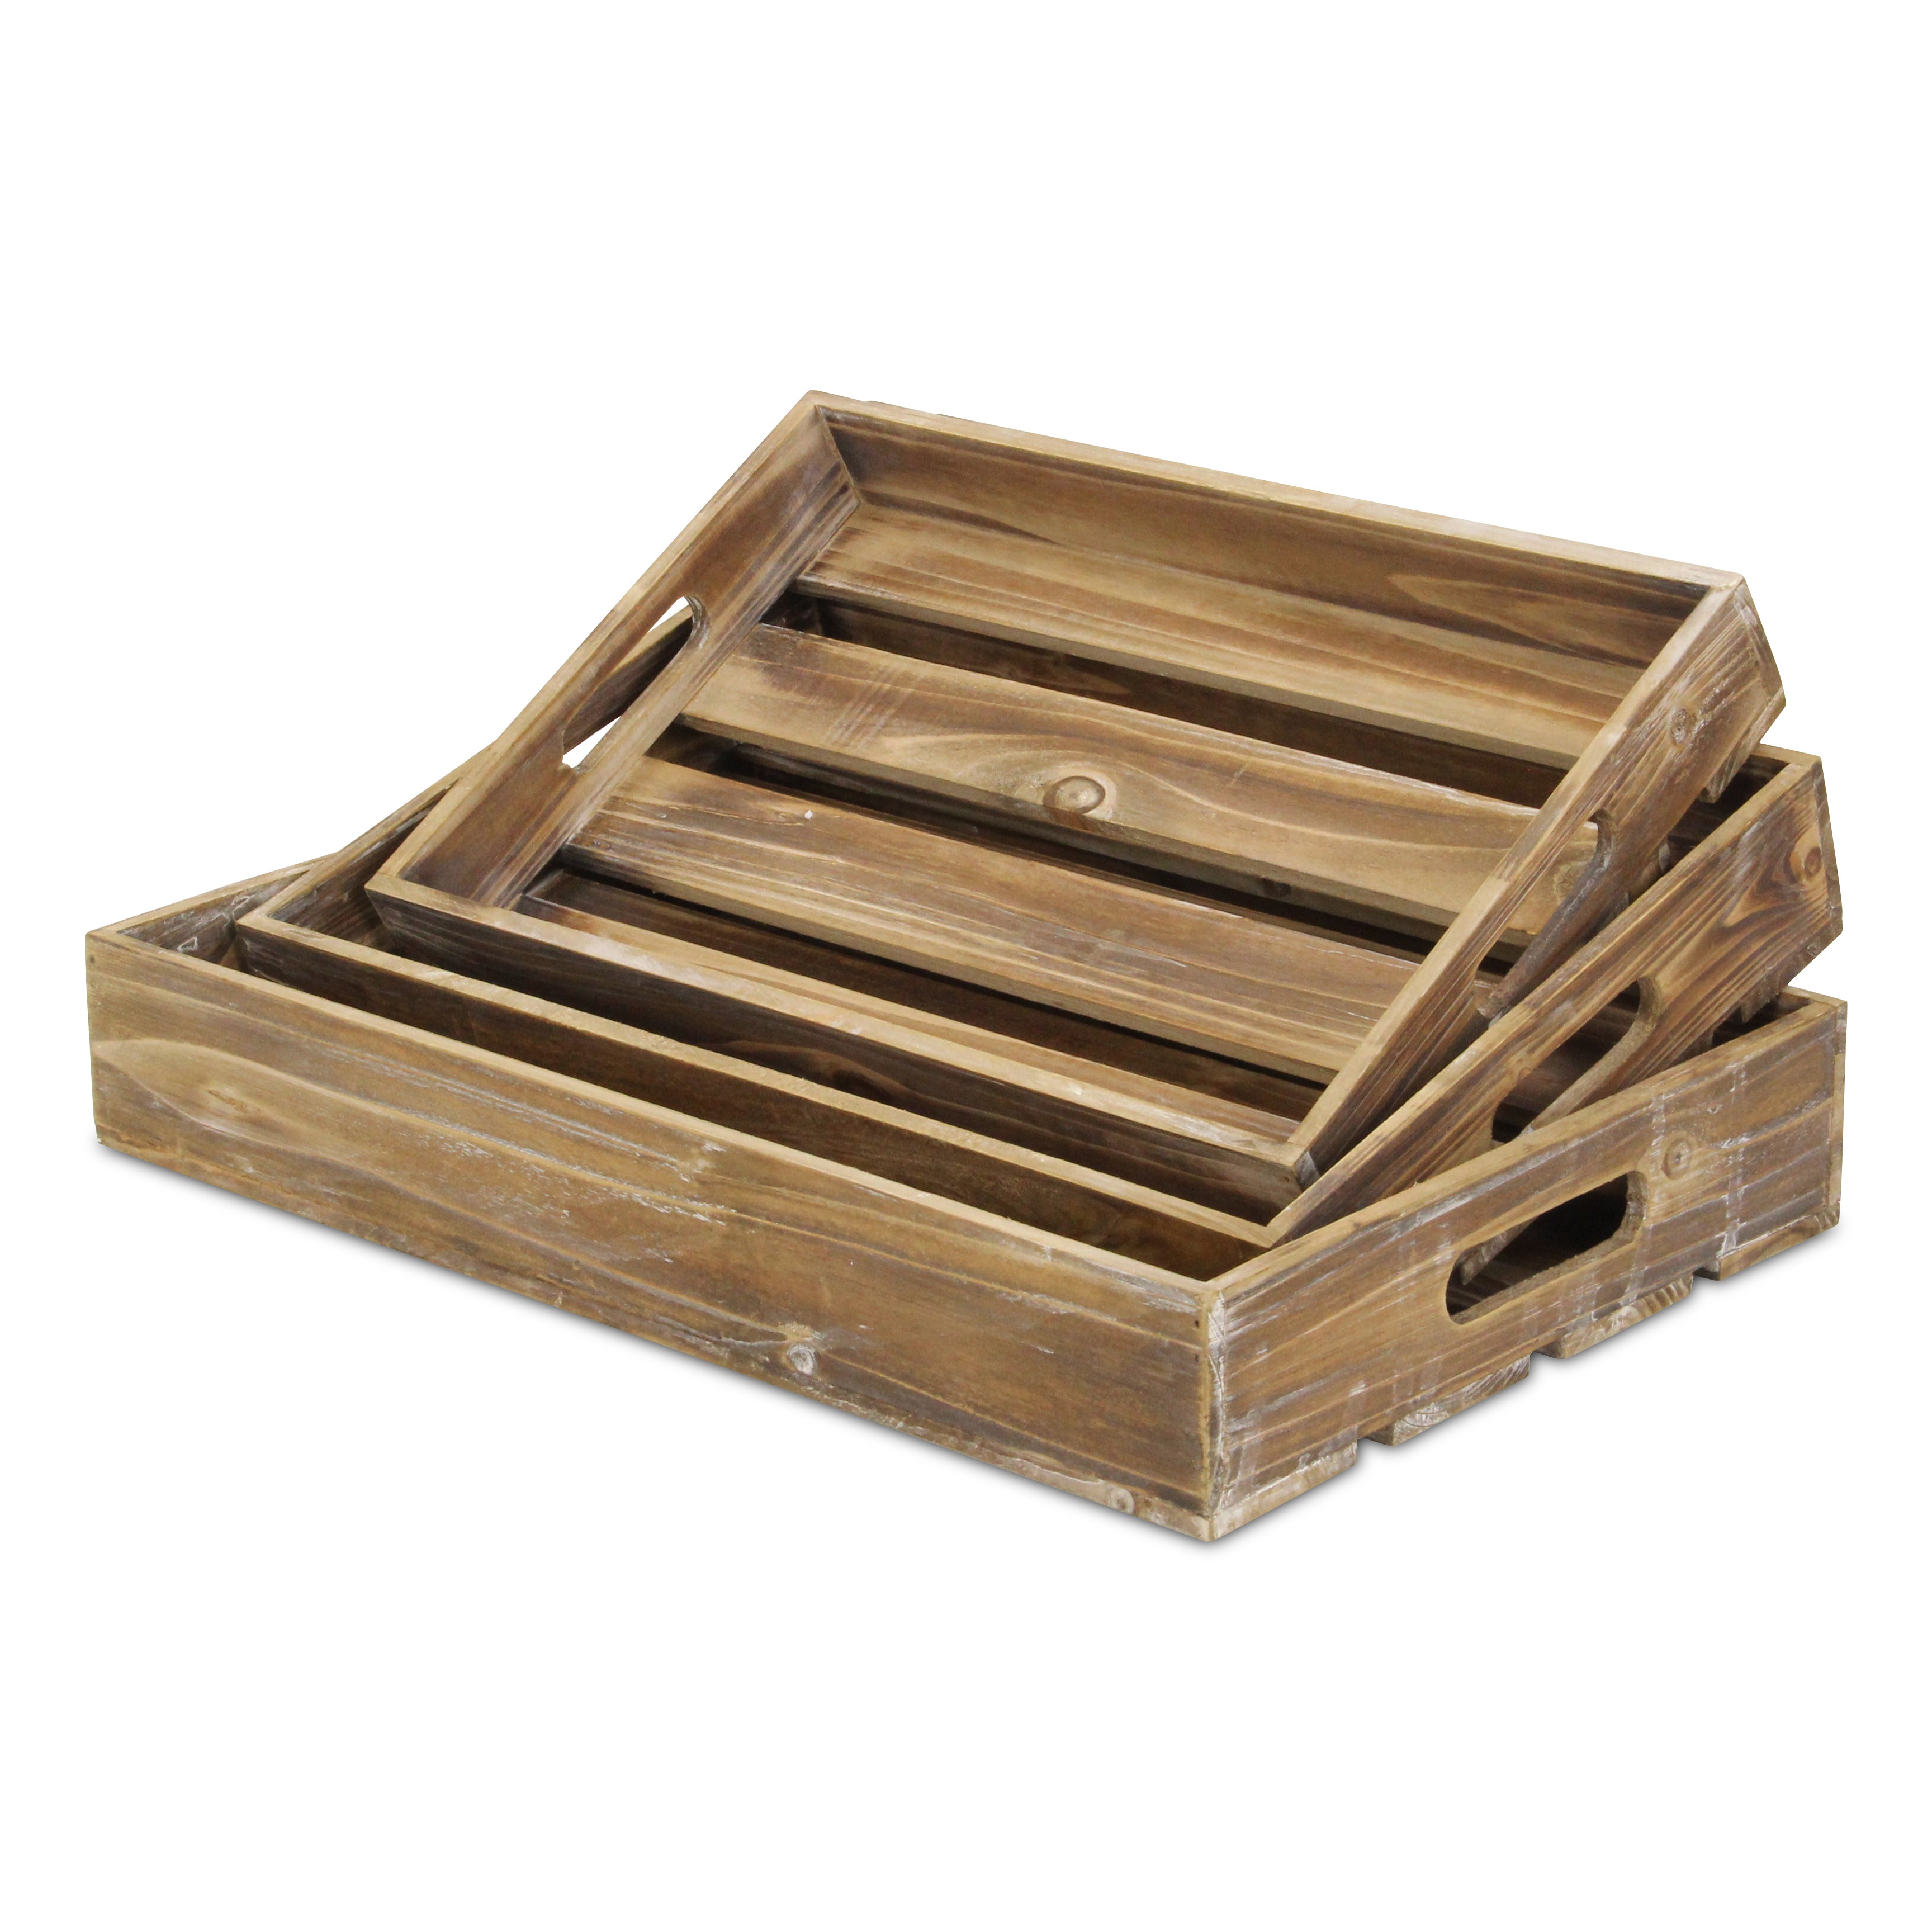 Nora Set of 3 Slatted Wood Trays - Brown